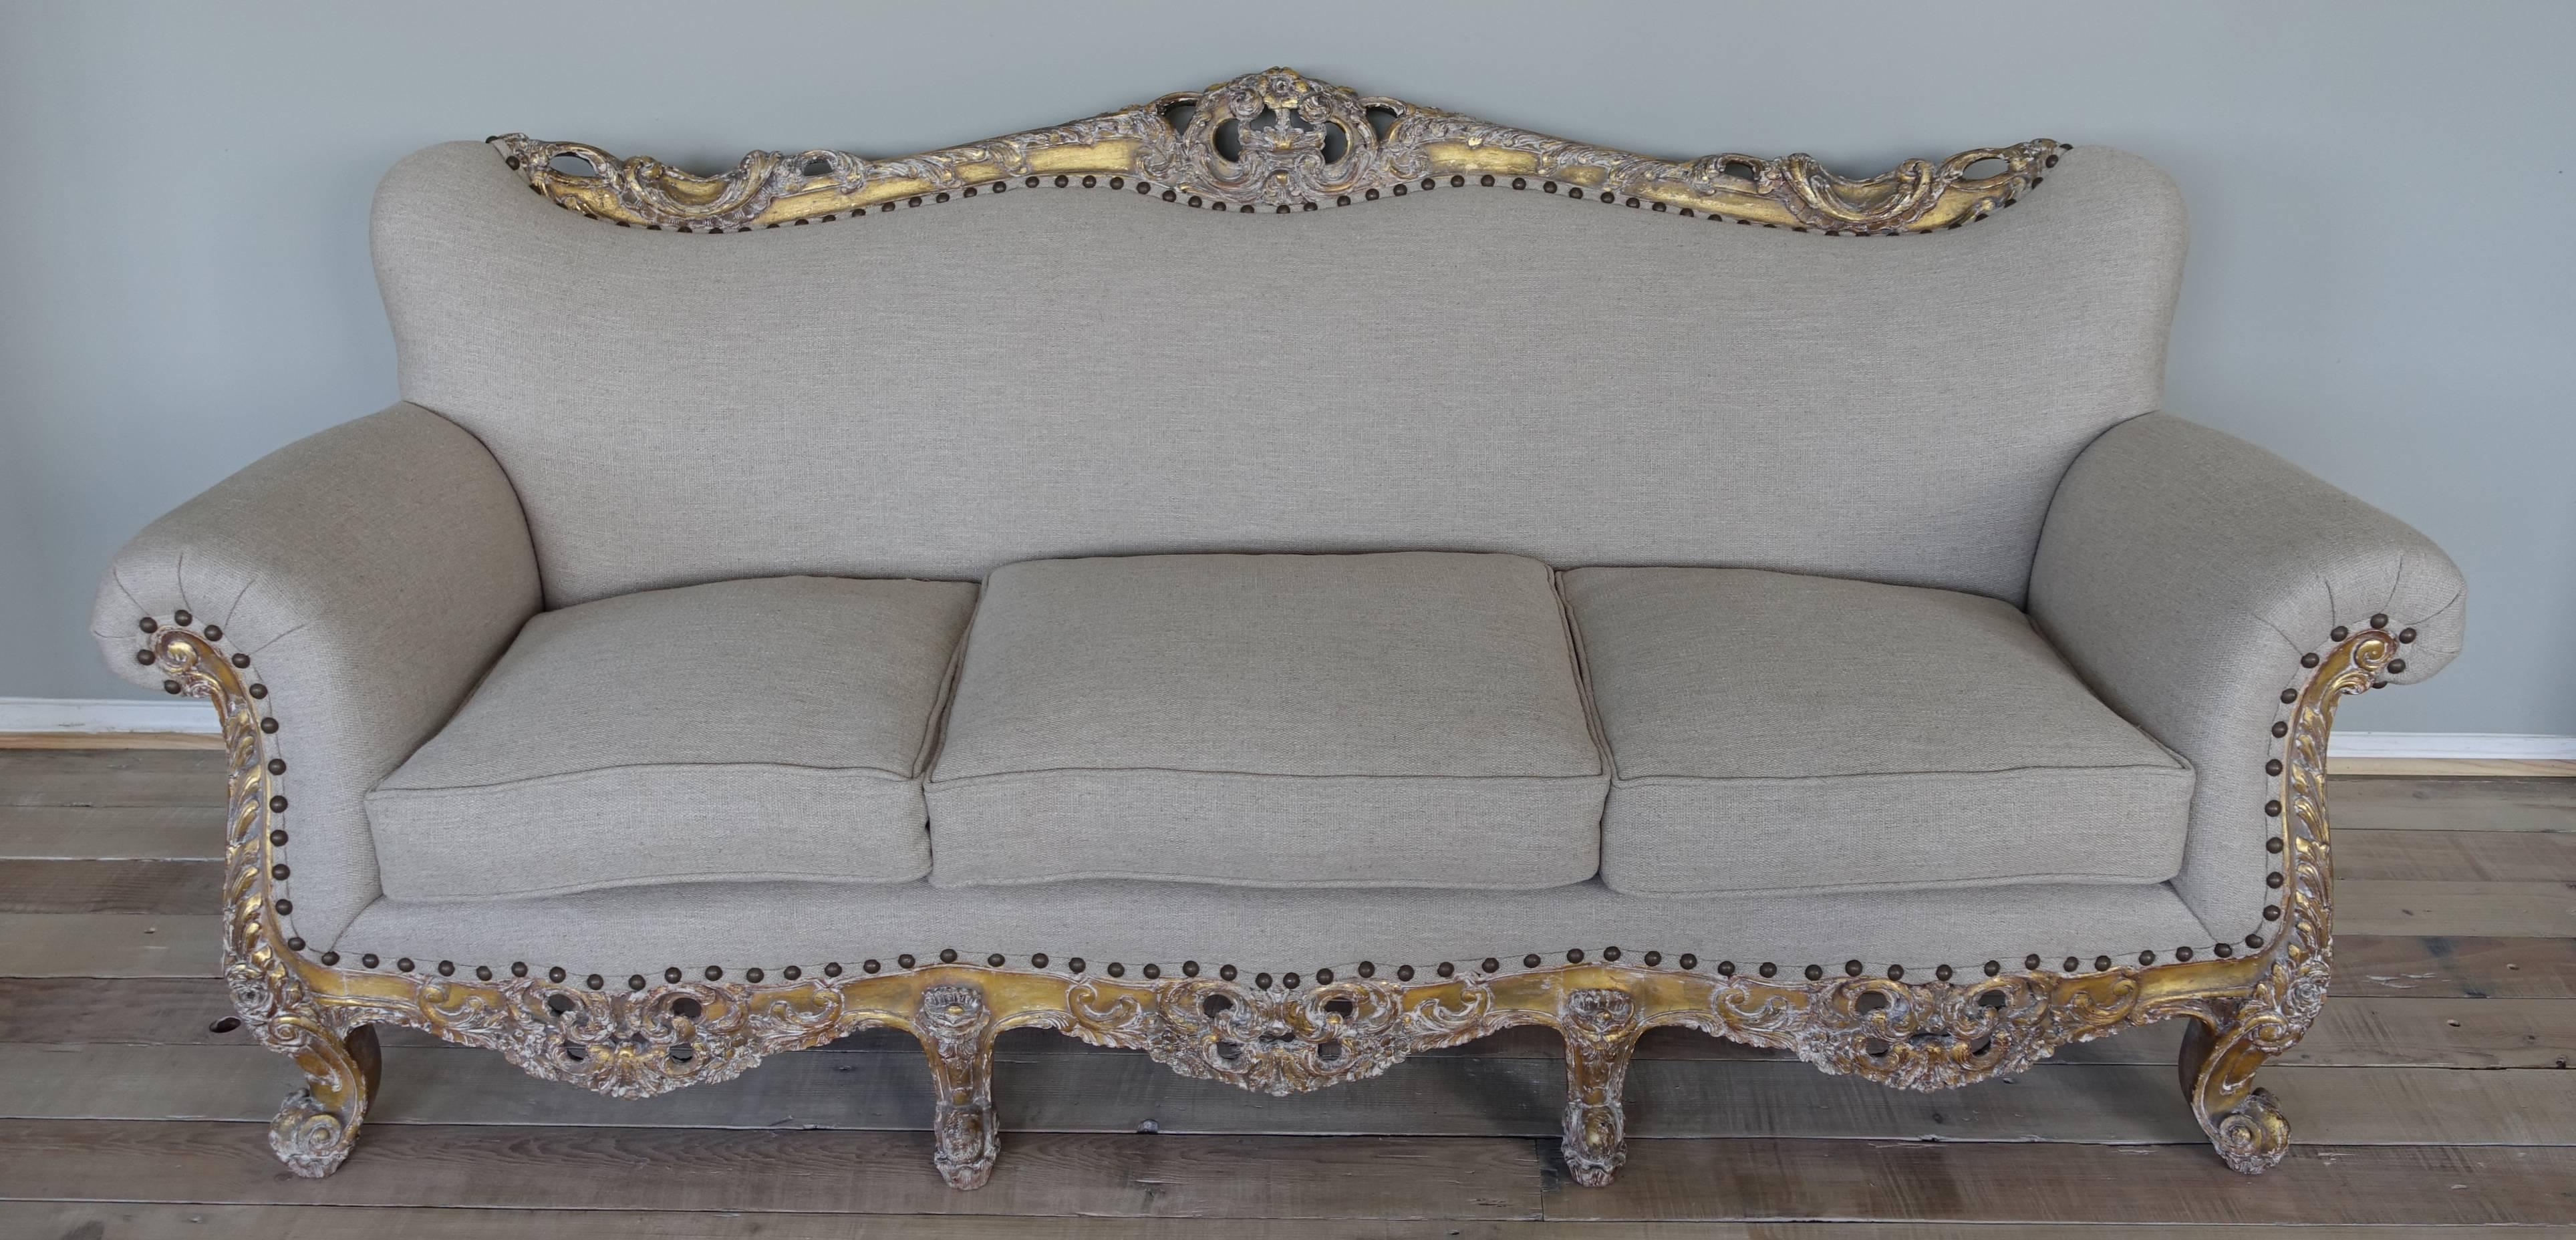 19th century Louis XV style French carved giltwood sofa standing on eight cabriole legs with ram's head feet. Newly upholstered in grain colored natural linen with nailhead trim detail. Carved acanthus leaf detail throughout. Loose down wrapped